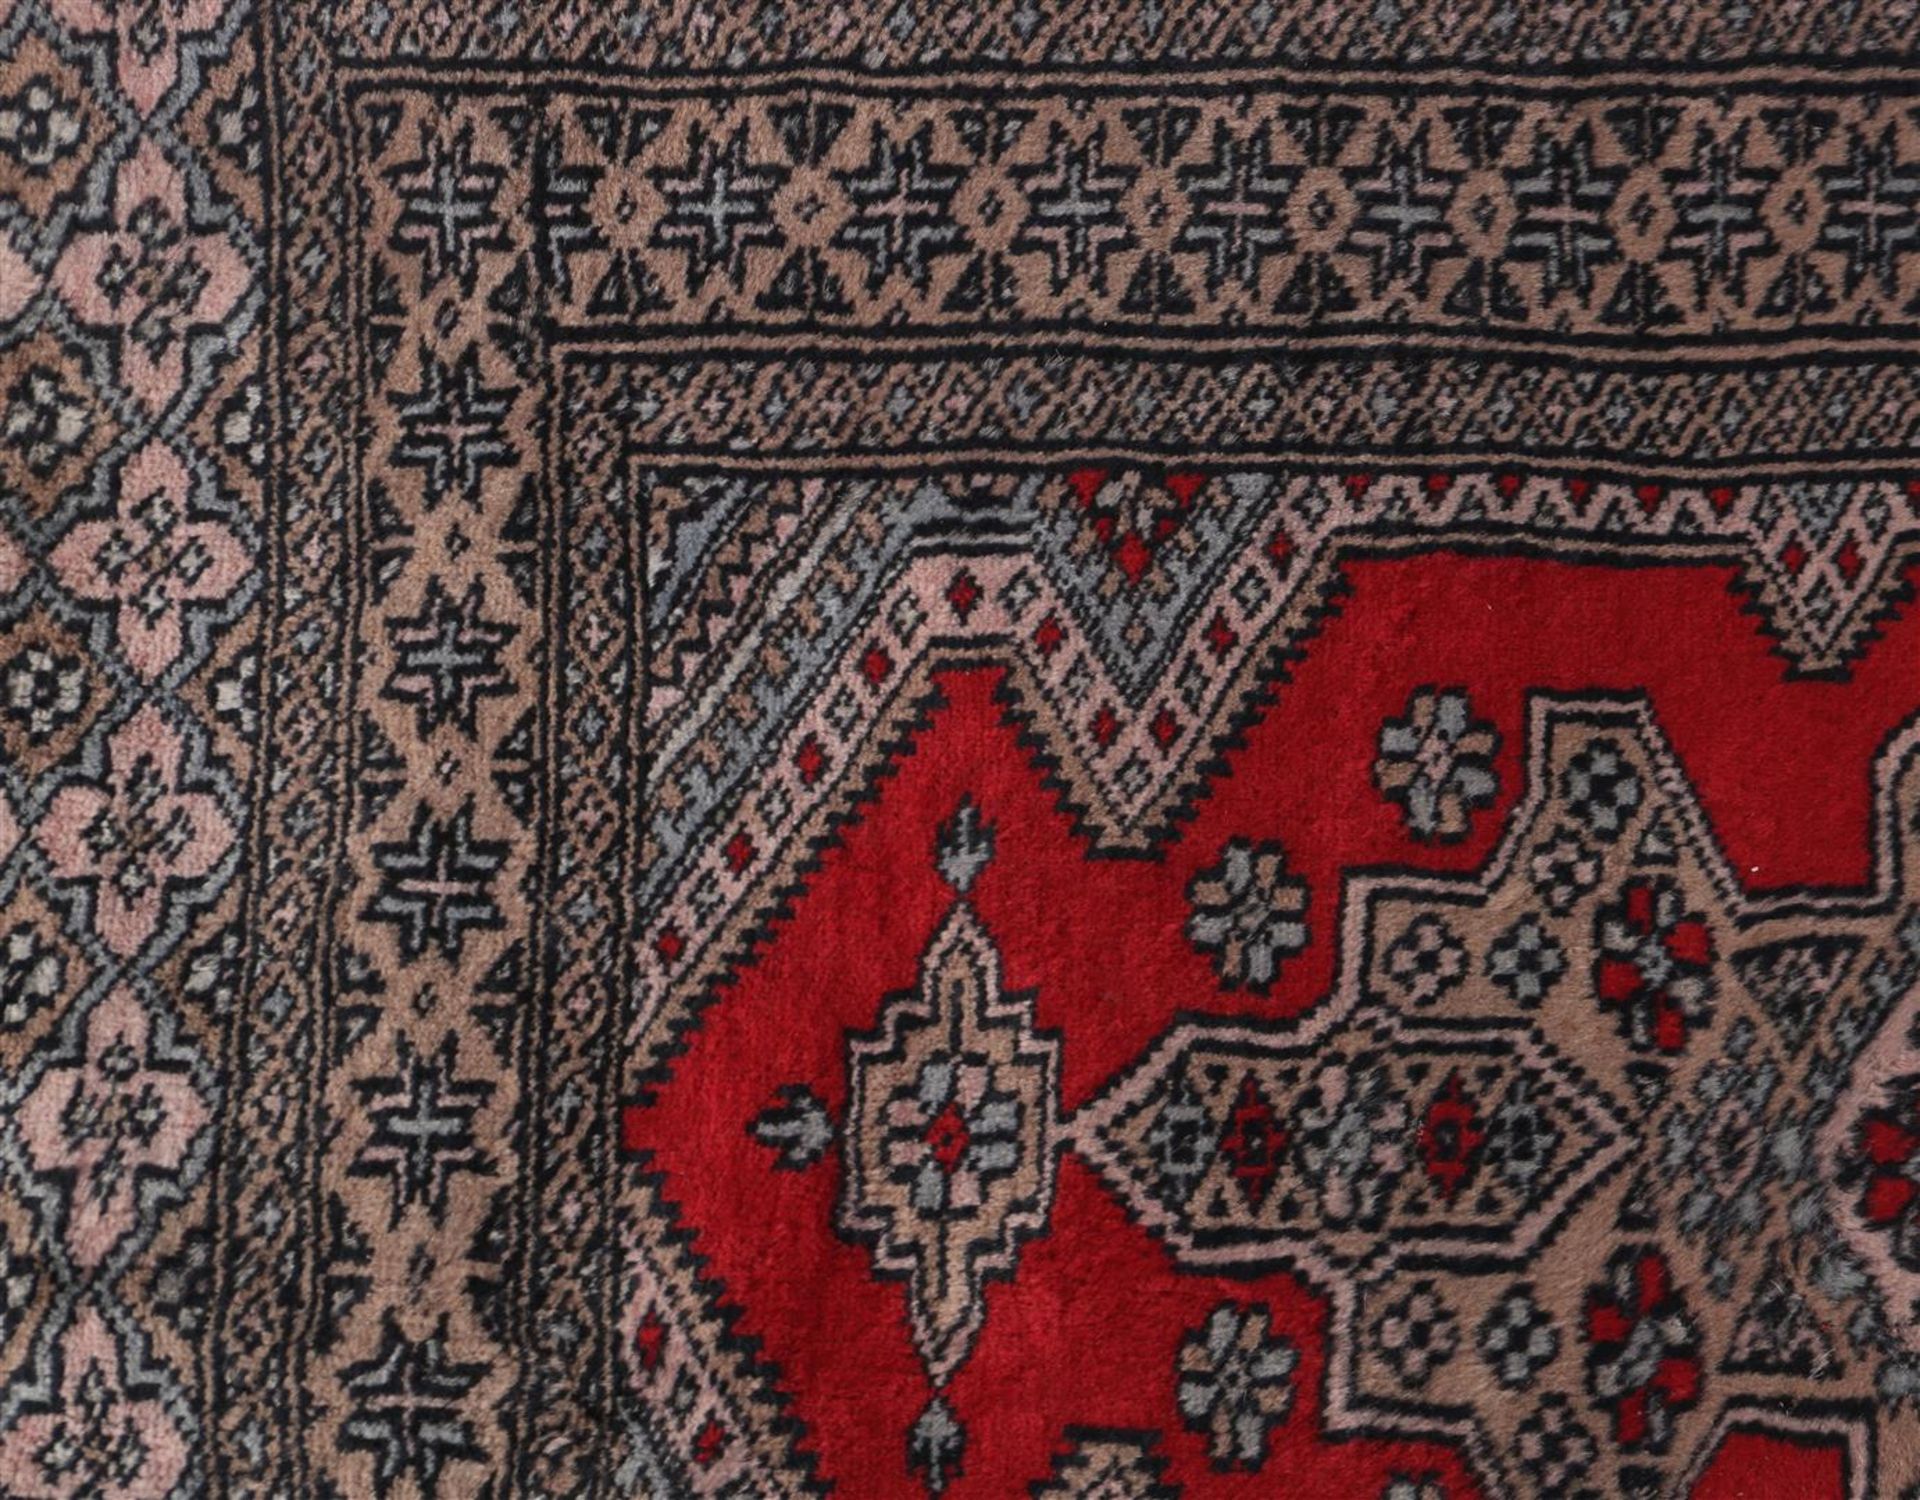 Hand-knotted oriental carpet, Lahore Pakistan - Image 3 of 4